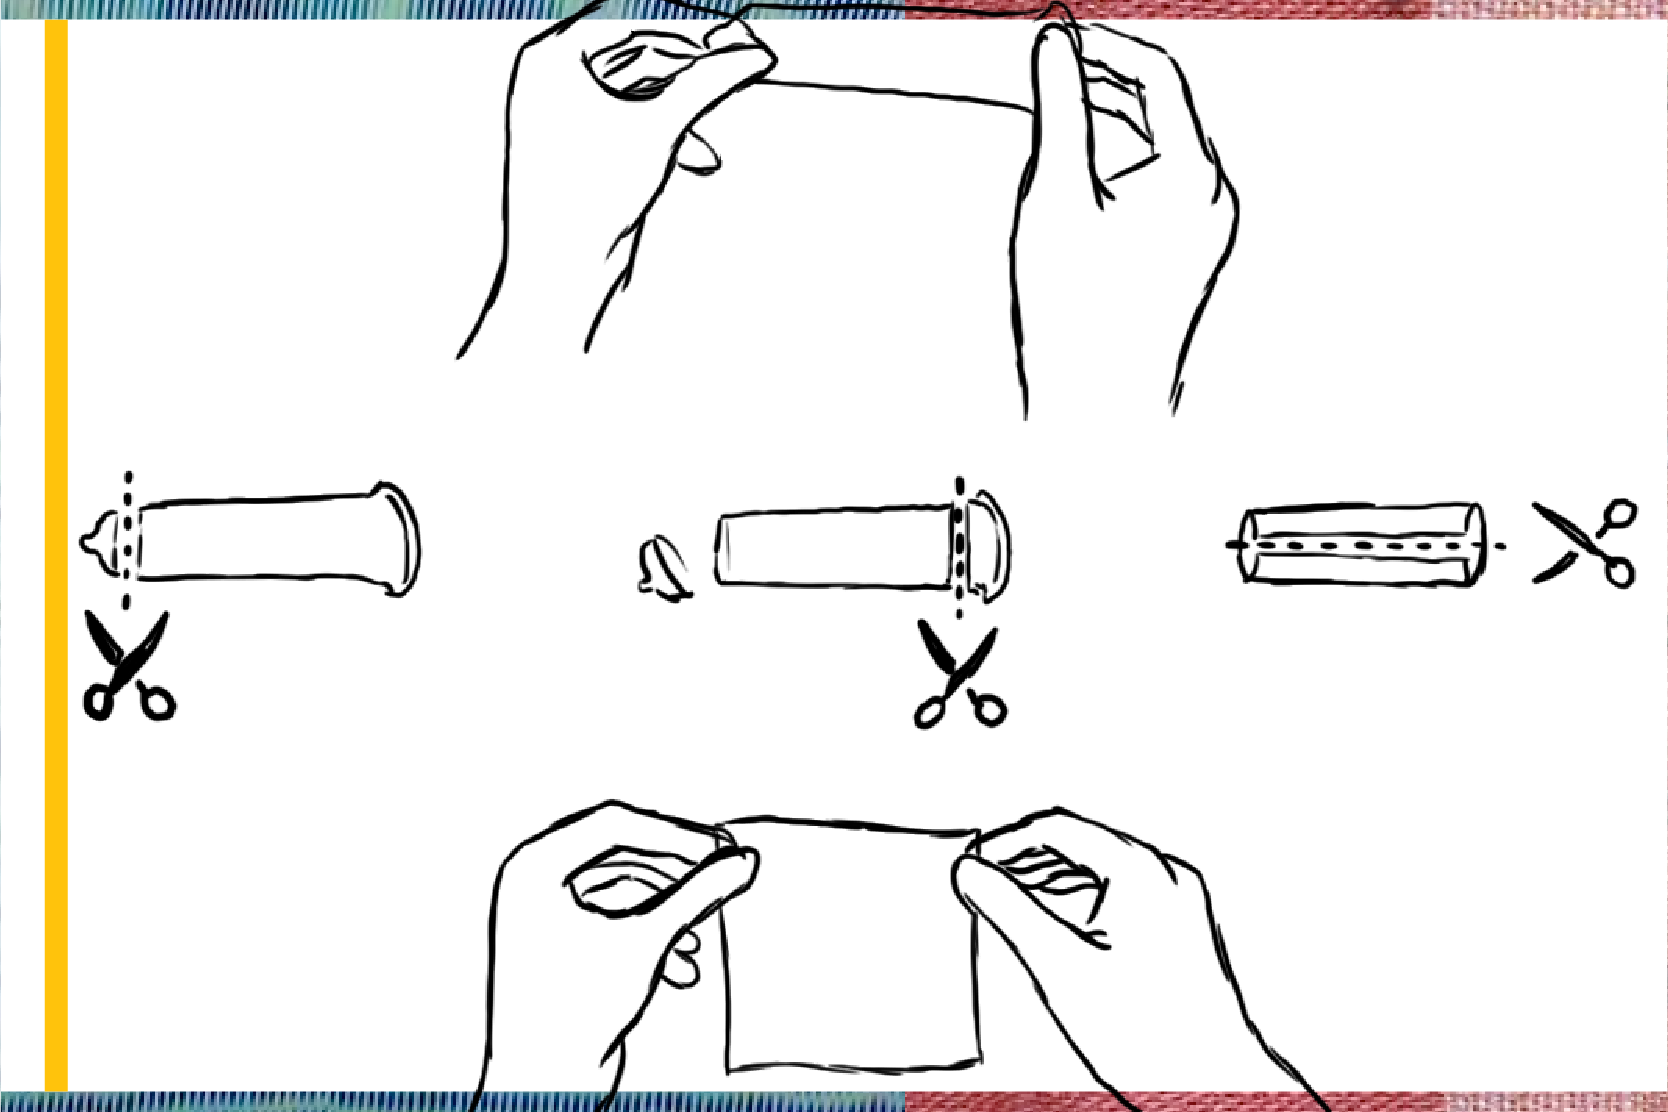 Illustration showing cutting a condom for use as a dental dam.